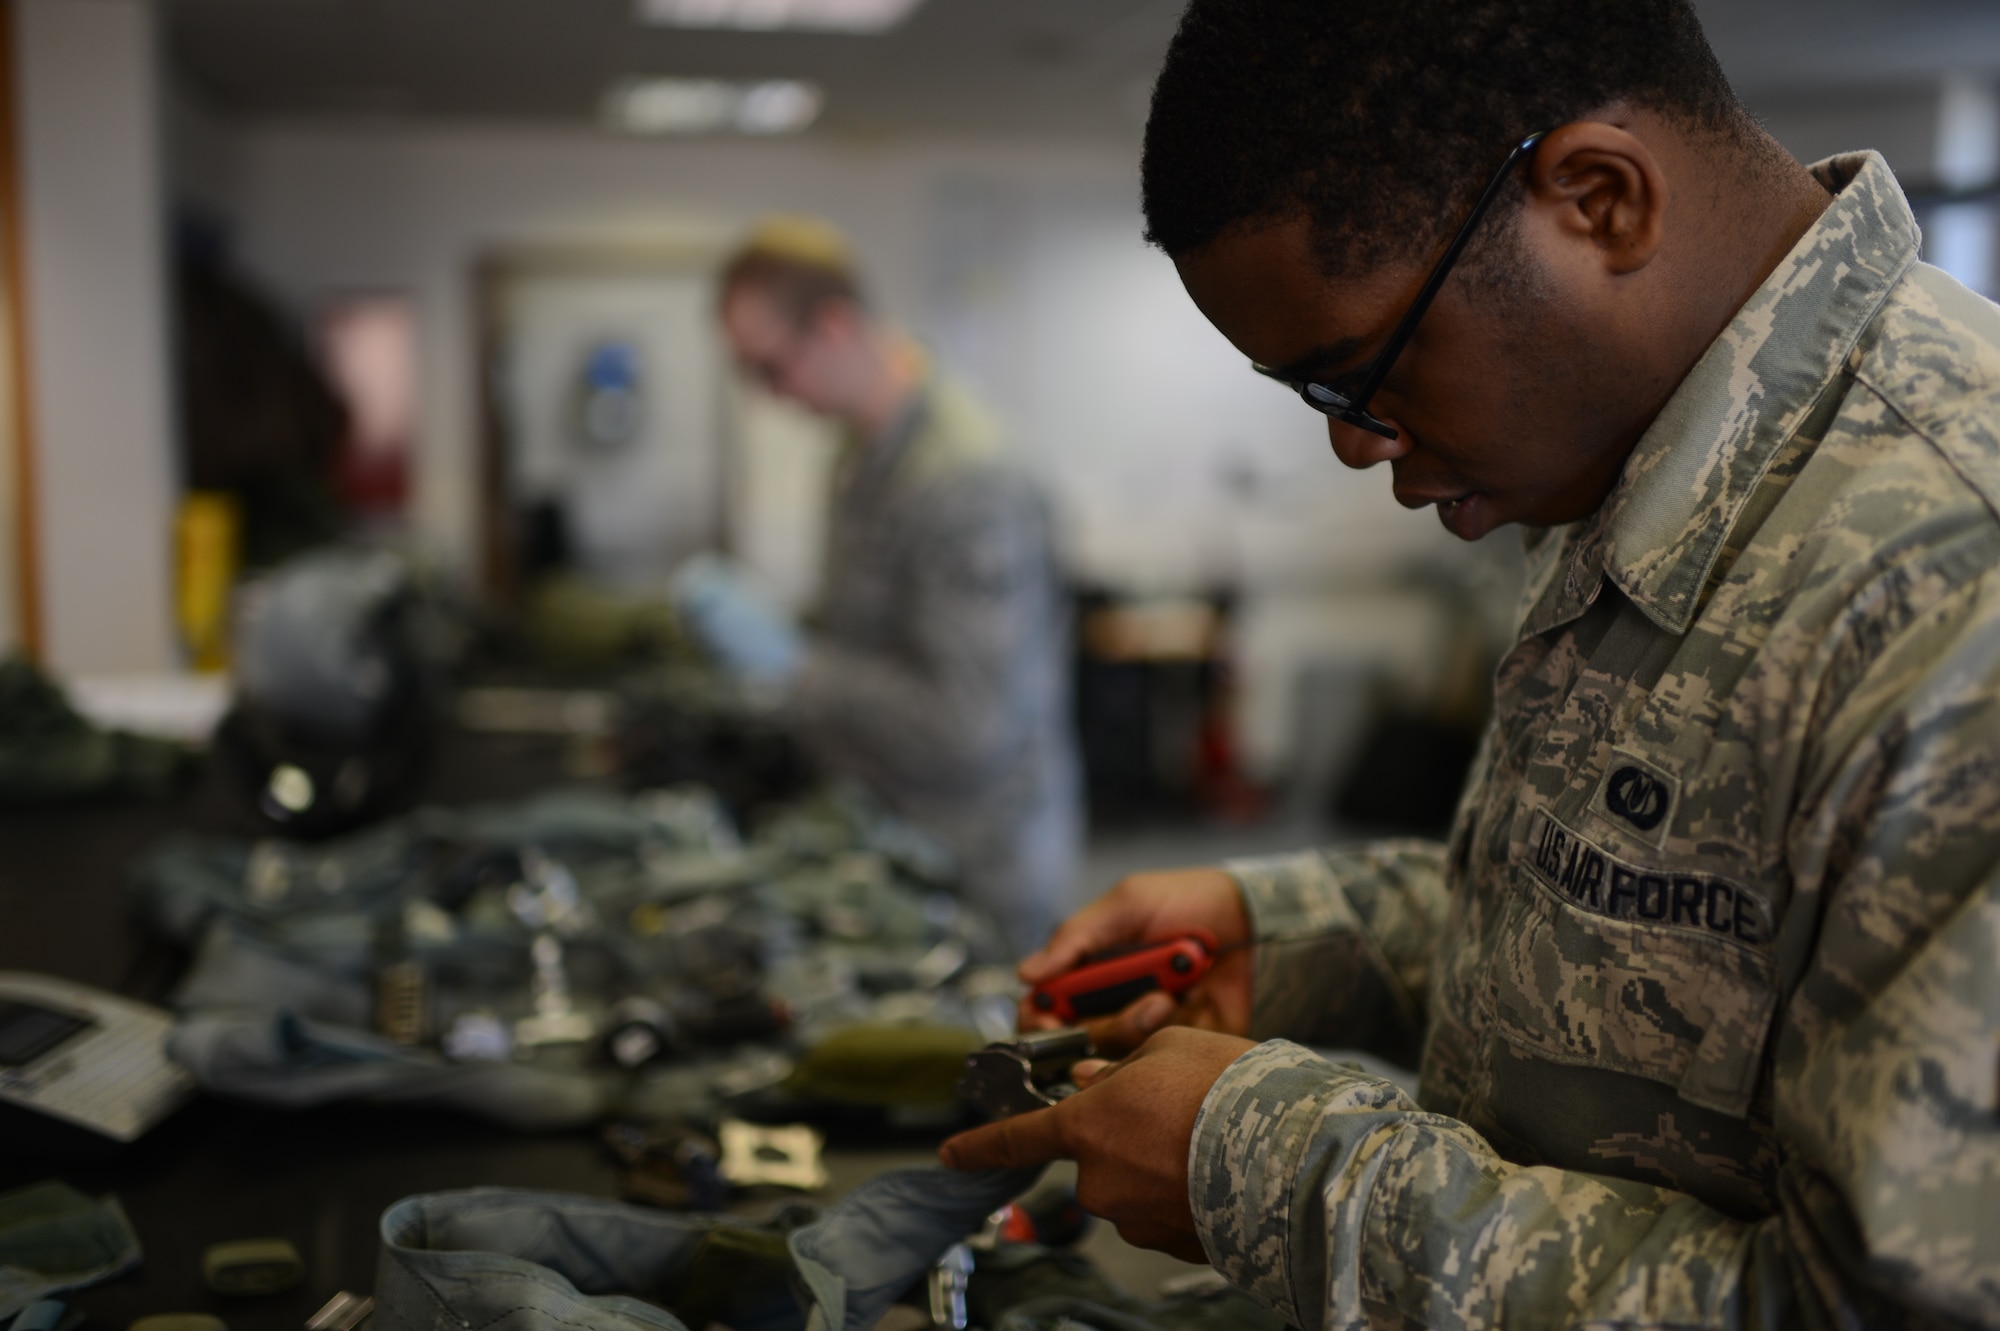 U.S. Air Force Airman 1st Class Stefon Newton, 52nd Operations Support Squadron aircrew flight equipment technician from Shreveport, La., dismantles a restraint harness at Spangdahlem Air Base, Germany, Feb. 24, 2014. The harness connects the pilot to the parachute and survival kit for use in case of in-flight emergencies and must be serviced every 30 days. (U.S. Air Force photo by Senior Airman Gustavo Castillo/Released) 